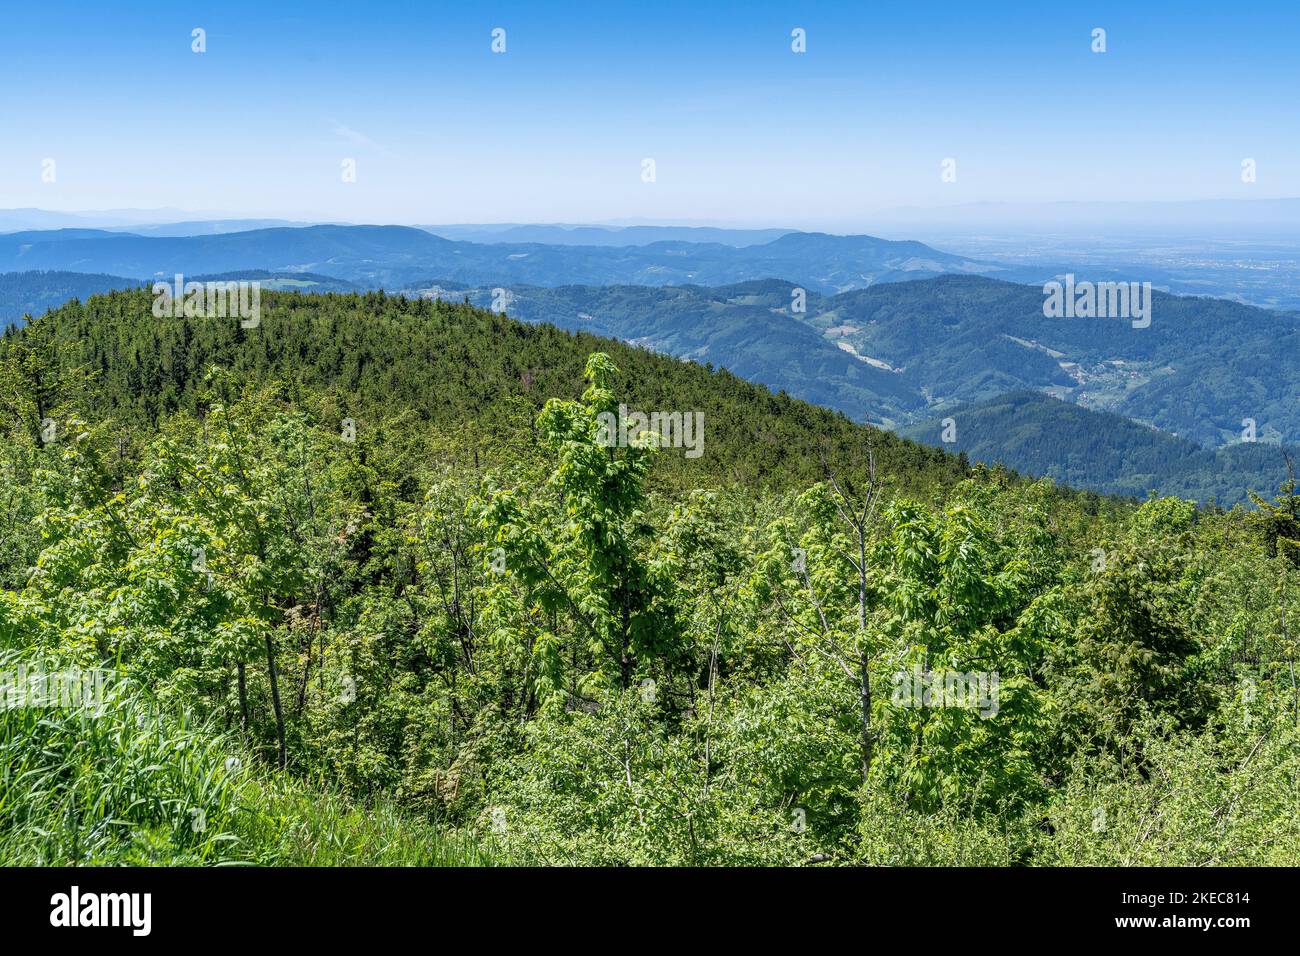 Europe, Germany, Southern Germany, Baden-Wuerttemberg, Black Forest, View from Hornisgrinde over northern Black Forest Stock Photo